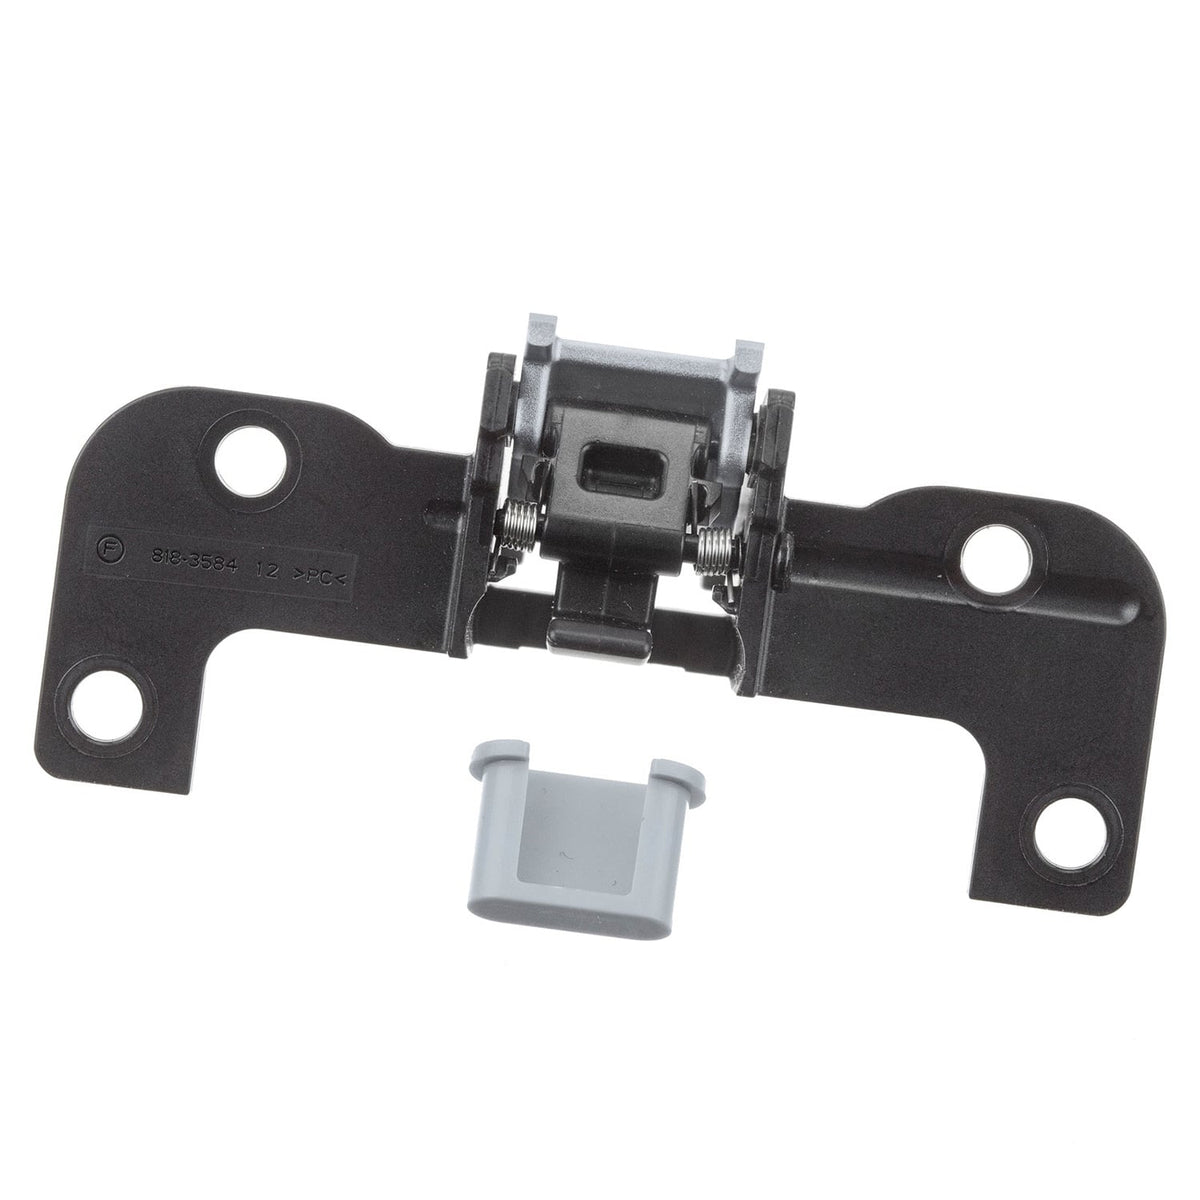 MEMORY DOOR LATCH (MDL) FOR IMAC 27" A1419 (LATE 2013, MID 2015)